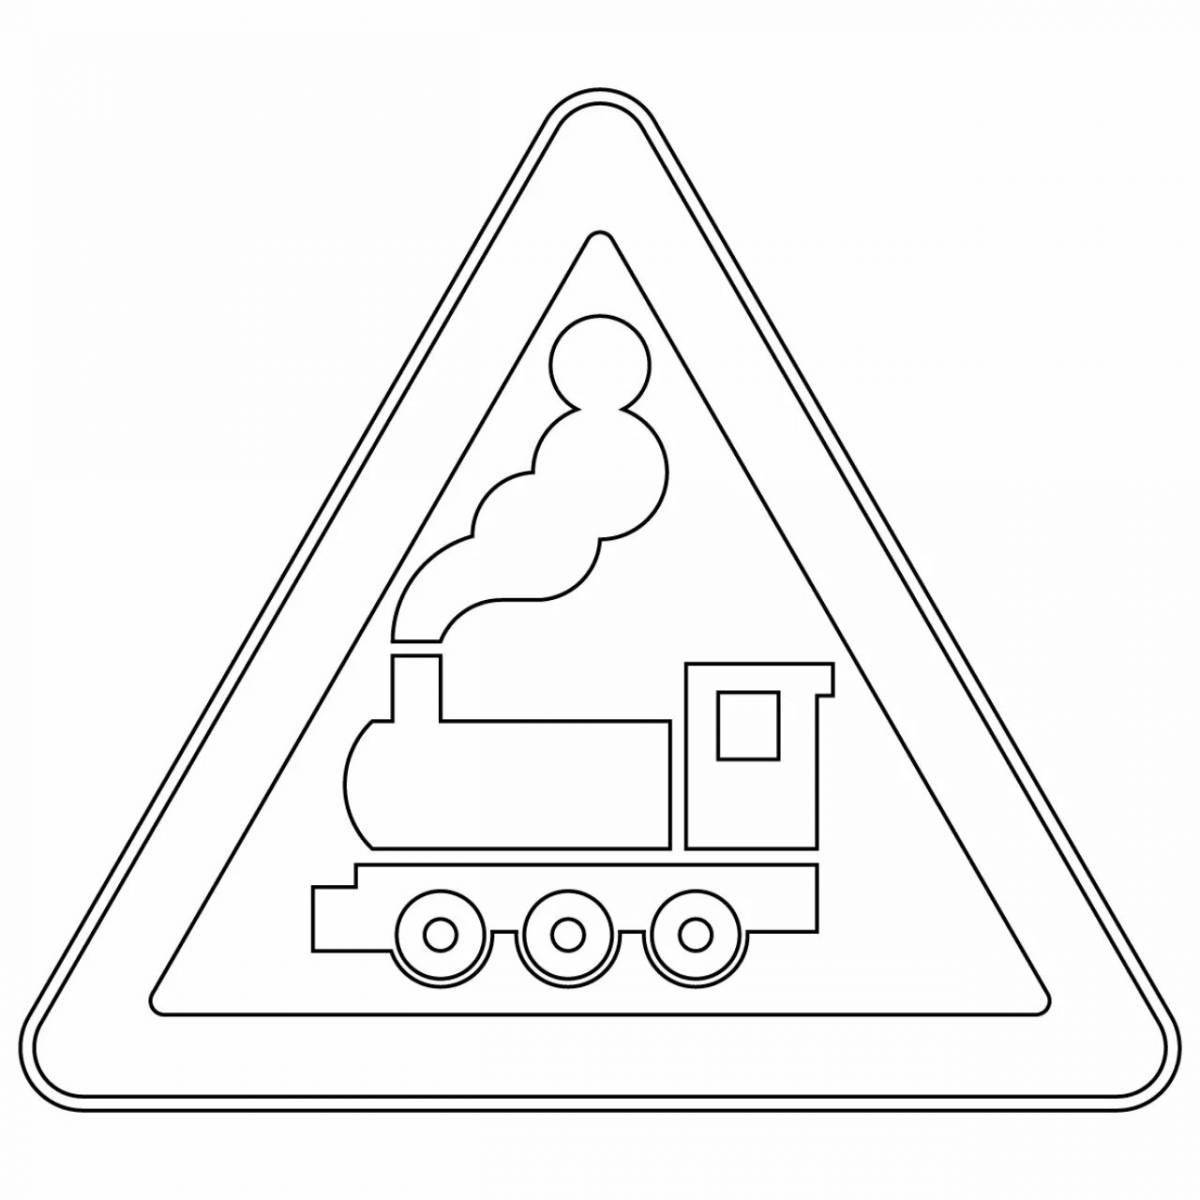 Mysterious road sign coloring page